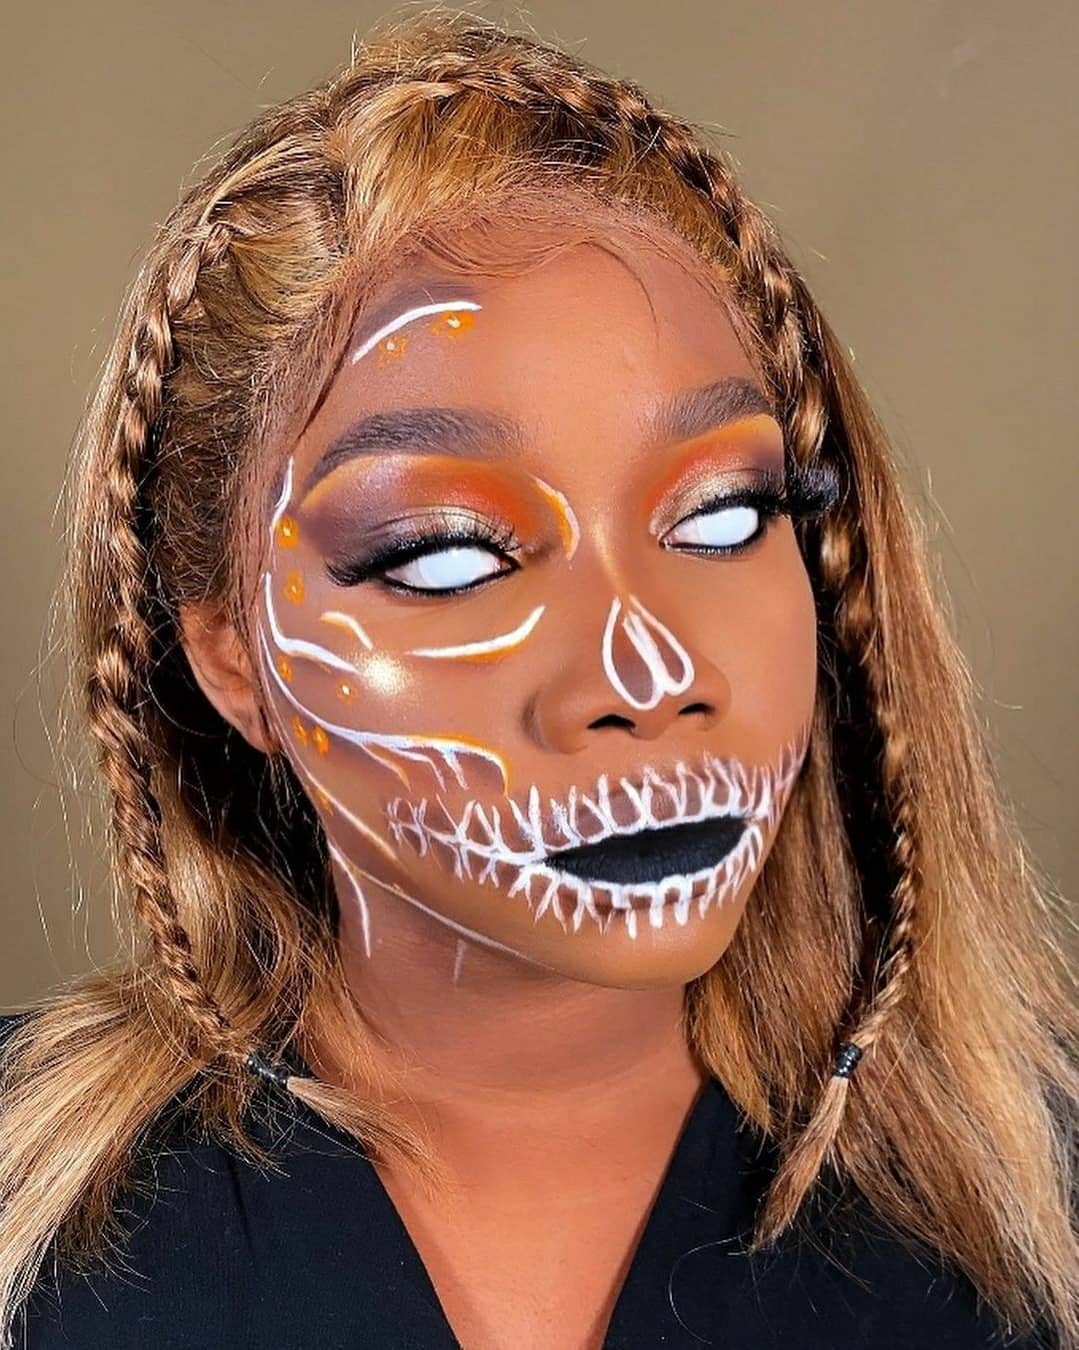 pilot Venture skjold 30 Makeup Looks To Try For Halloween 2022 - Beauty Bay Edited